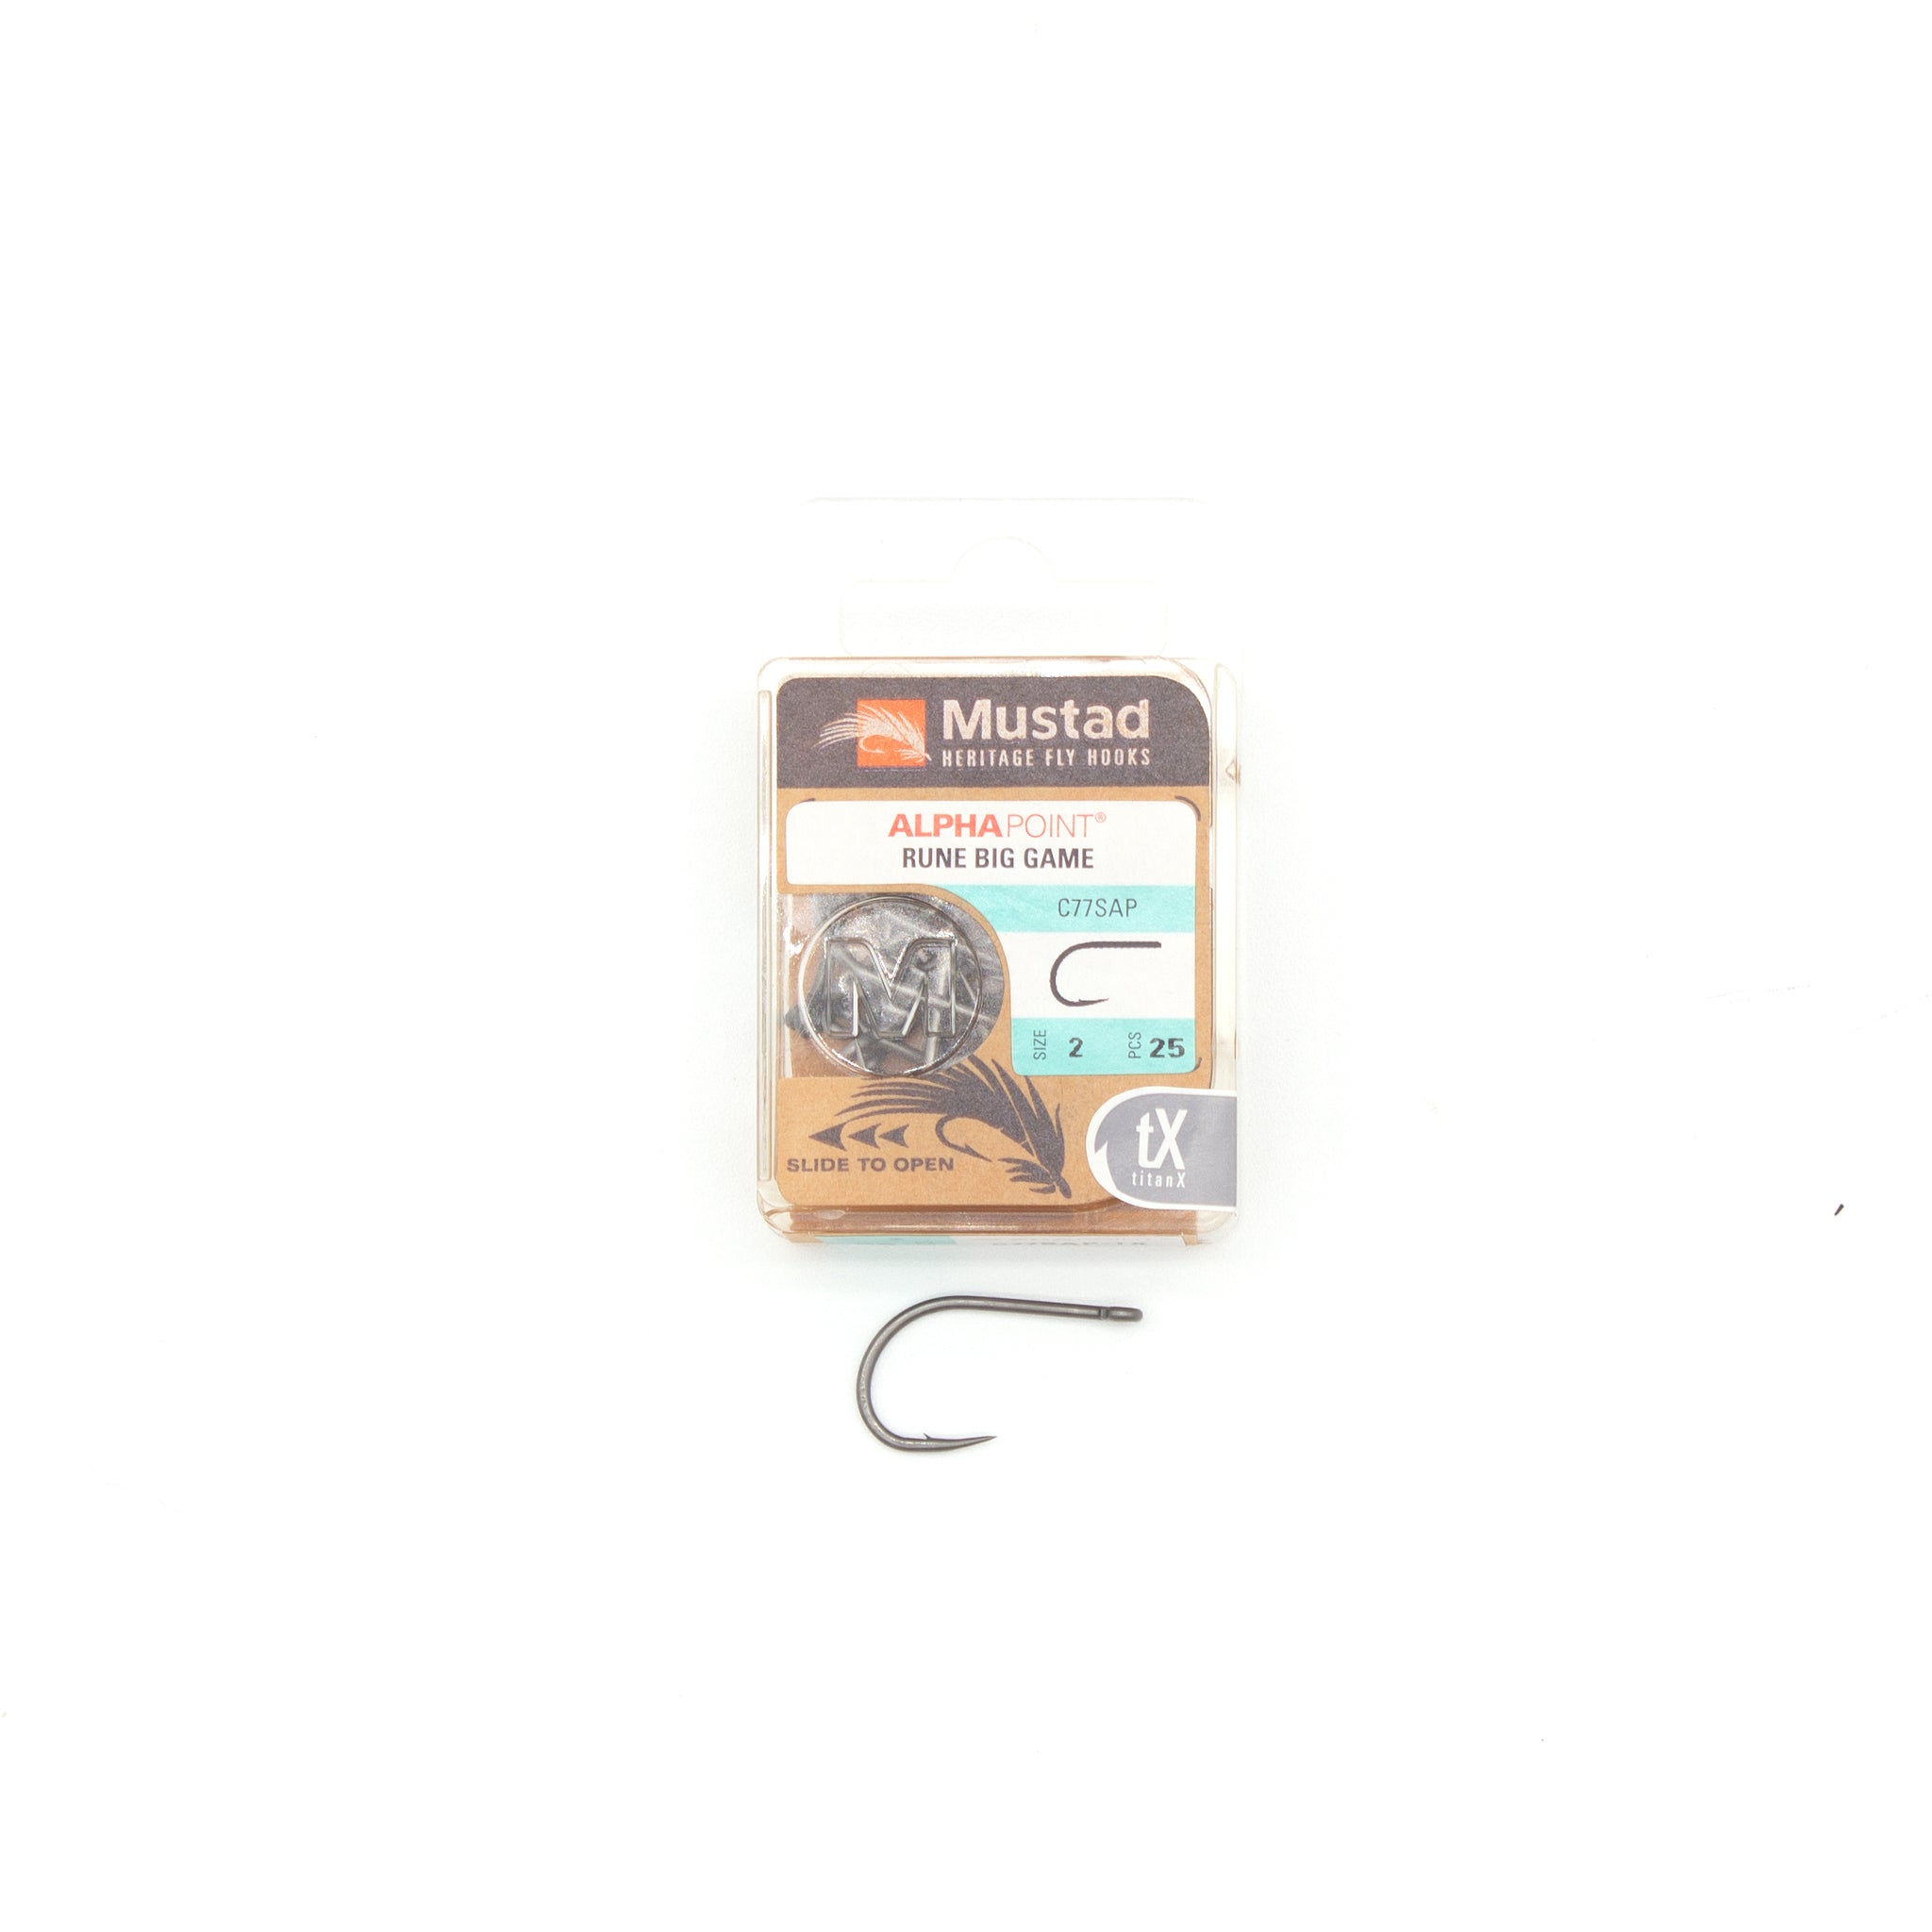 Mustad Signature C70SNP-DT Light Big Game Fly Tying Hooks – At The